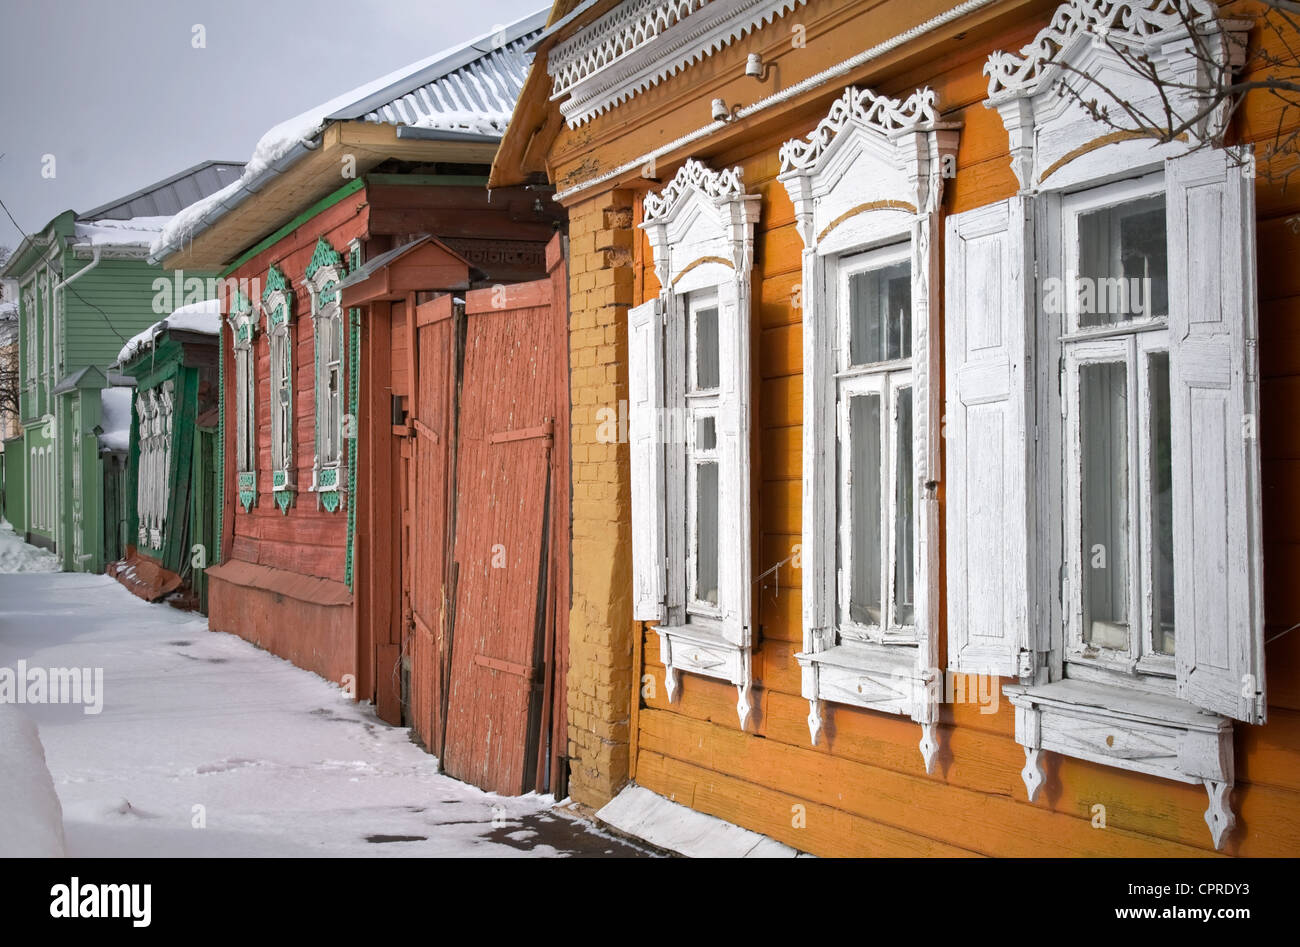 Street with old Russian wooden houses at winter in historical town Kolomna, Moscow Region, Russia Stock Photo